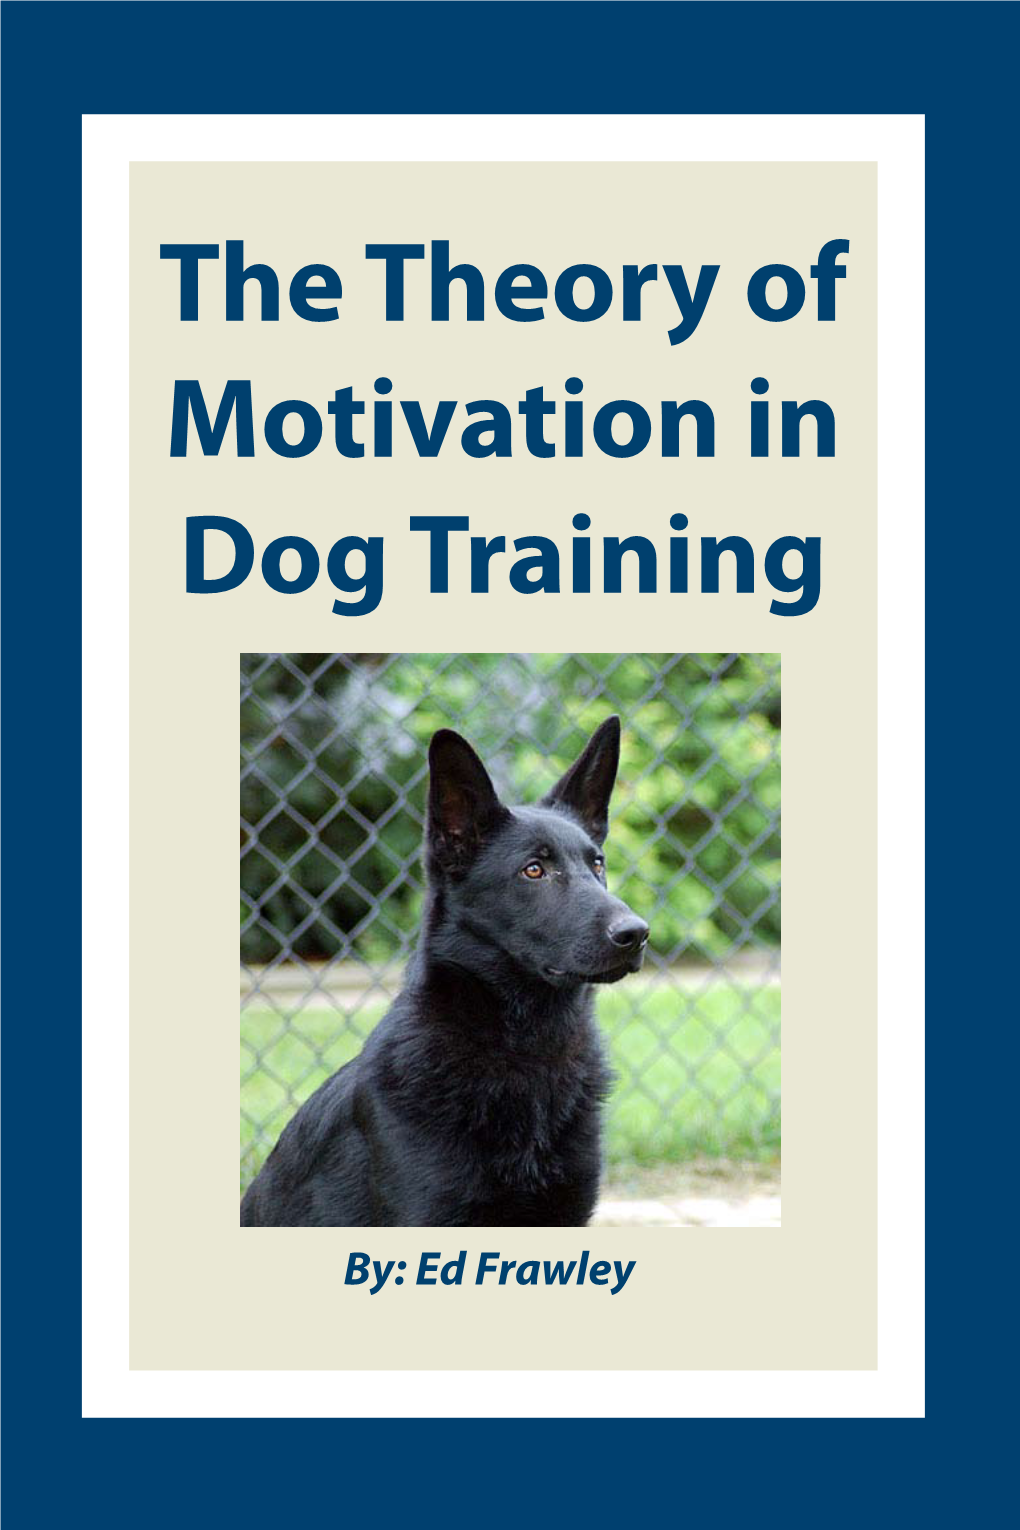 The Theory of Motivation in Dog Training